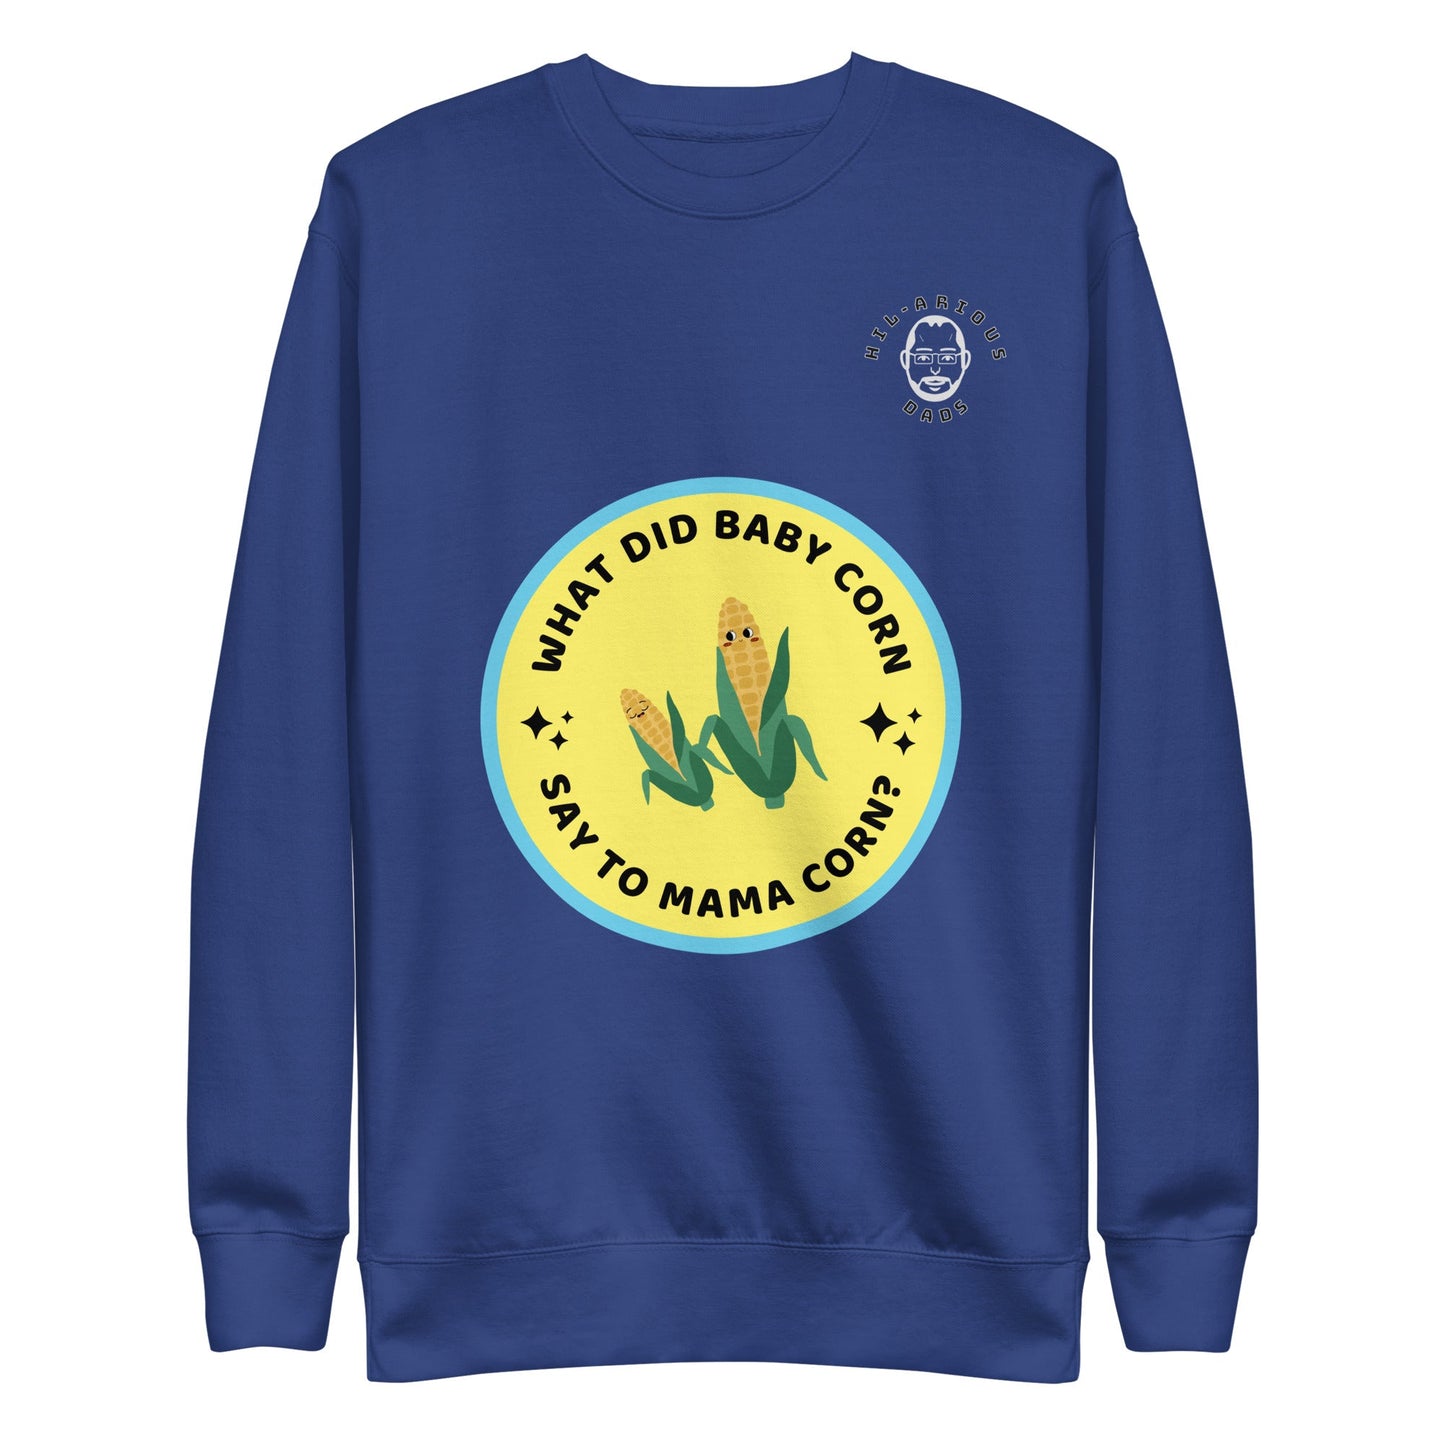 What did baby corn say to mama corn?-Sweatshirt - Hil-arious Dads